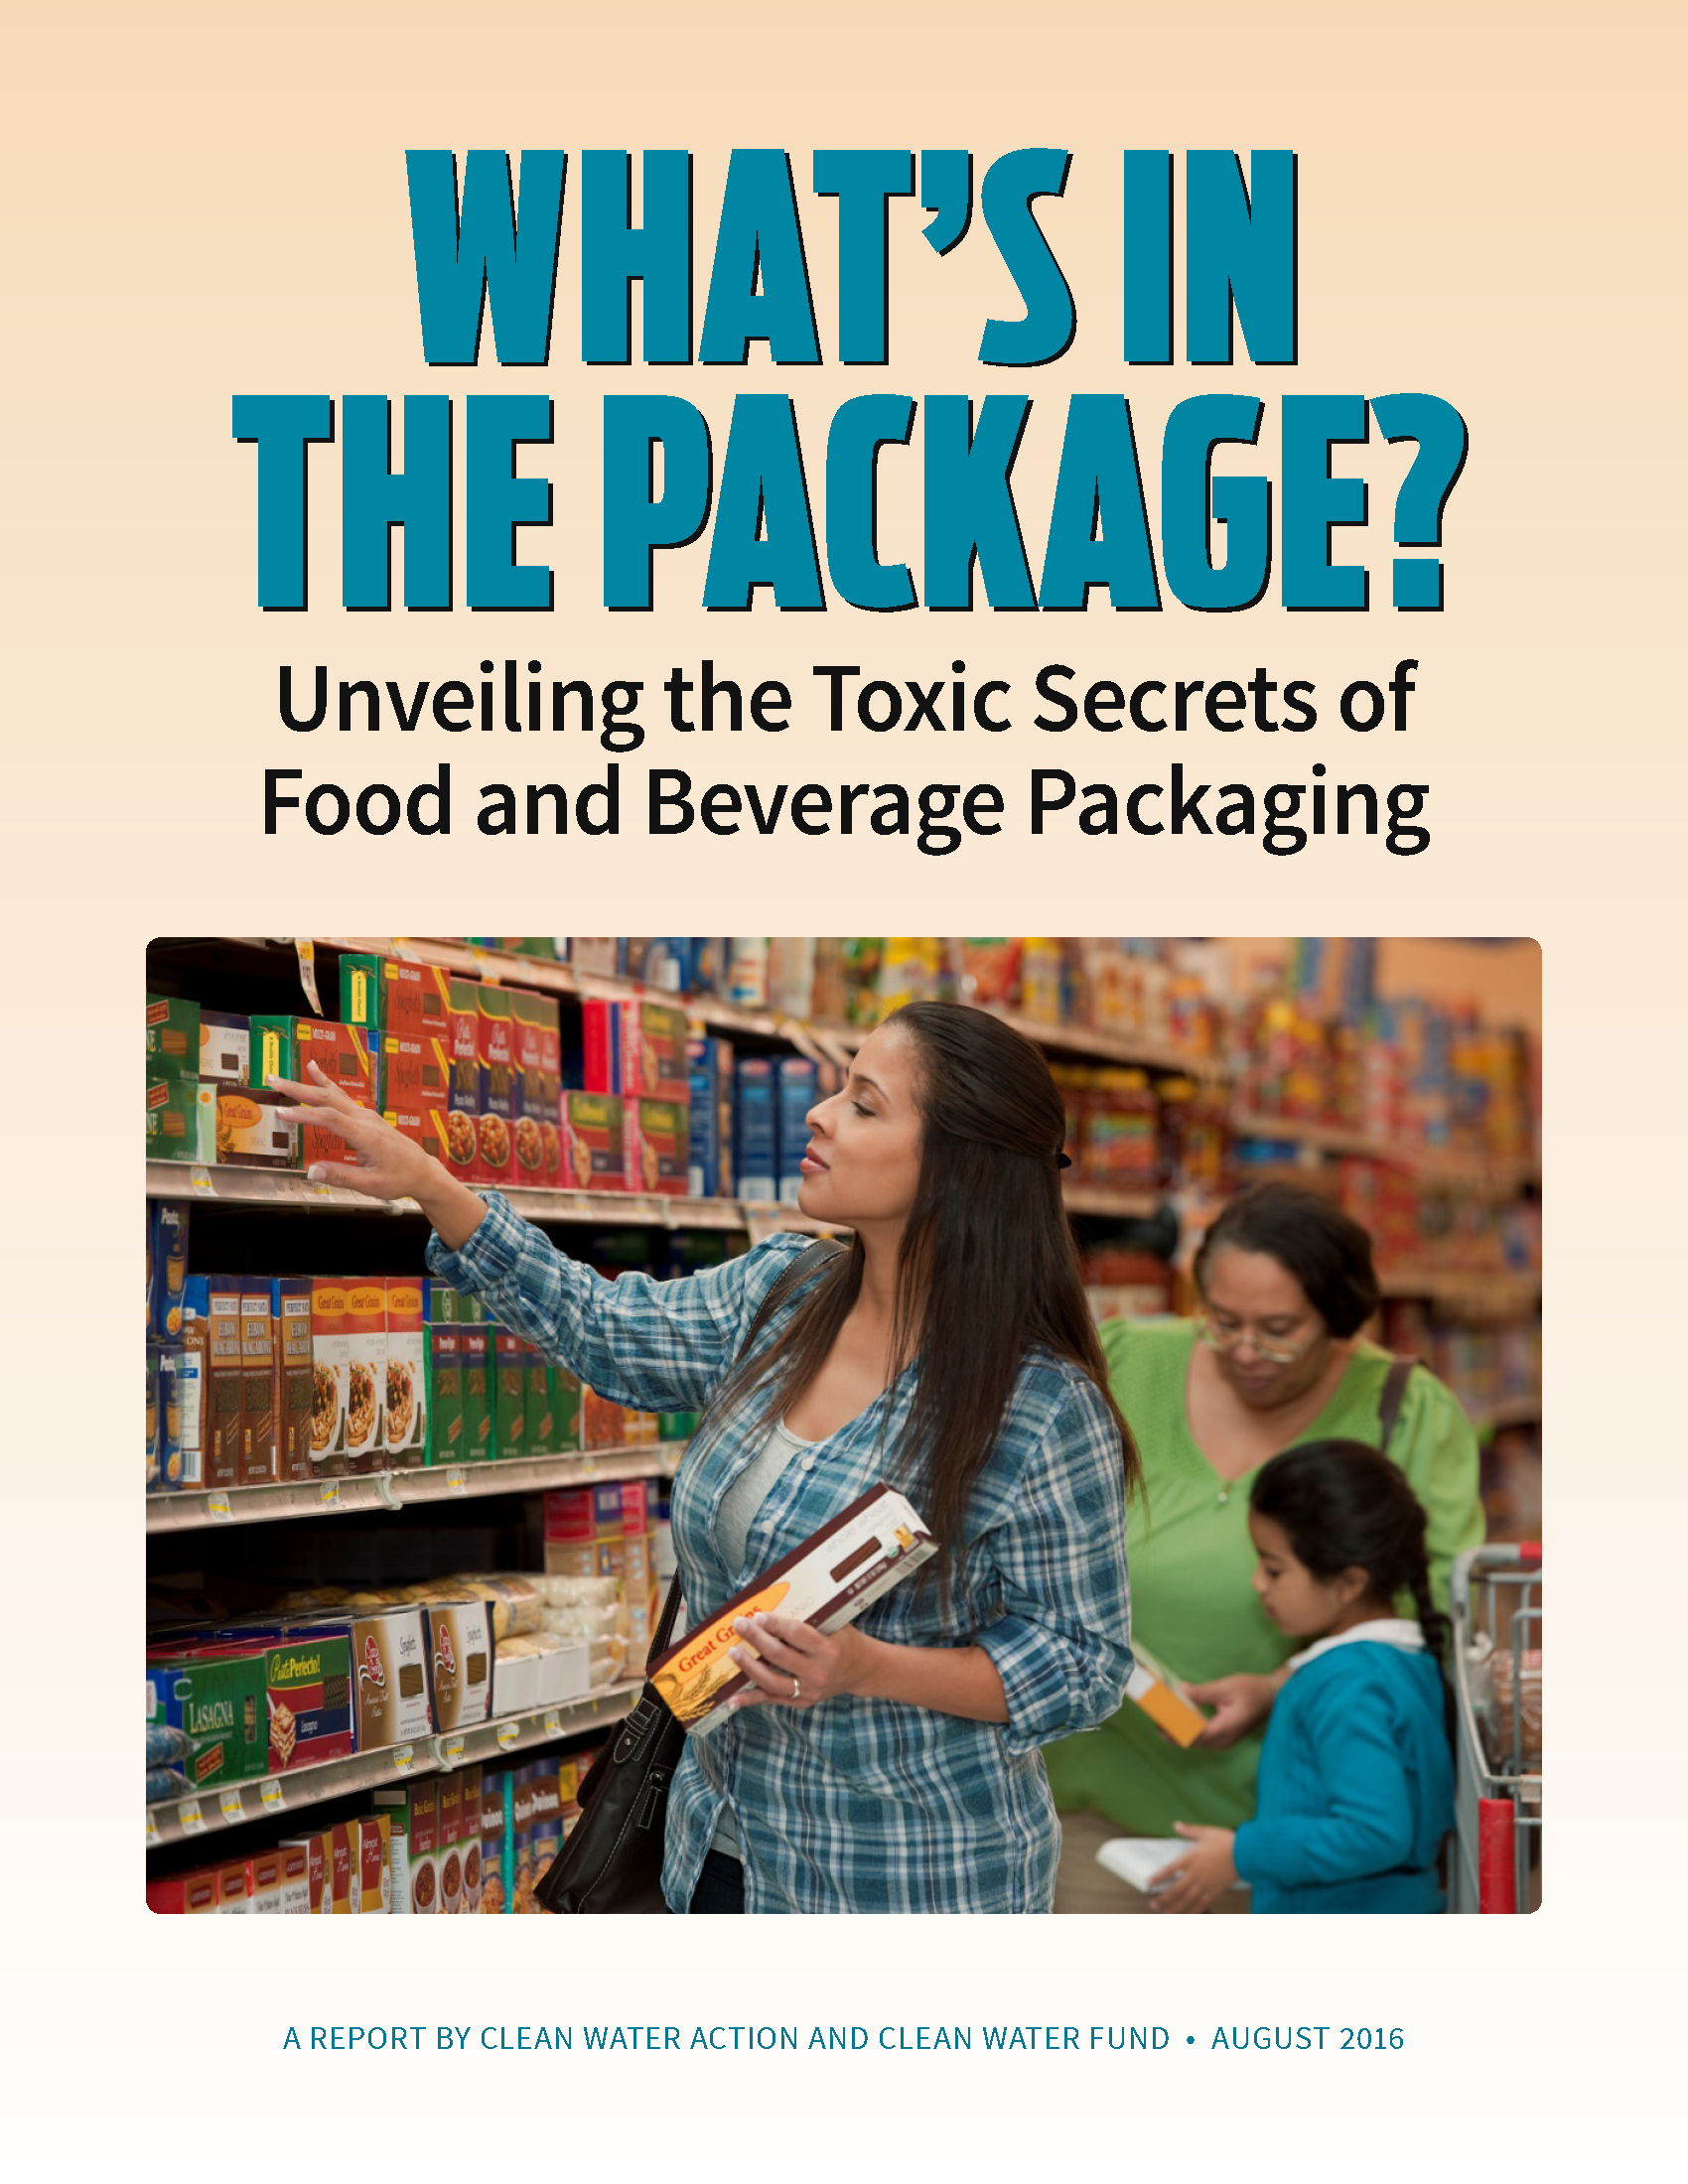 What's it the package? Unveiling the toxic secrets of food and beverage packaging 